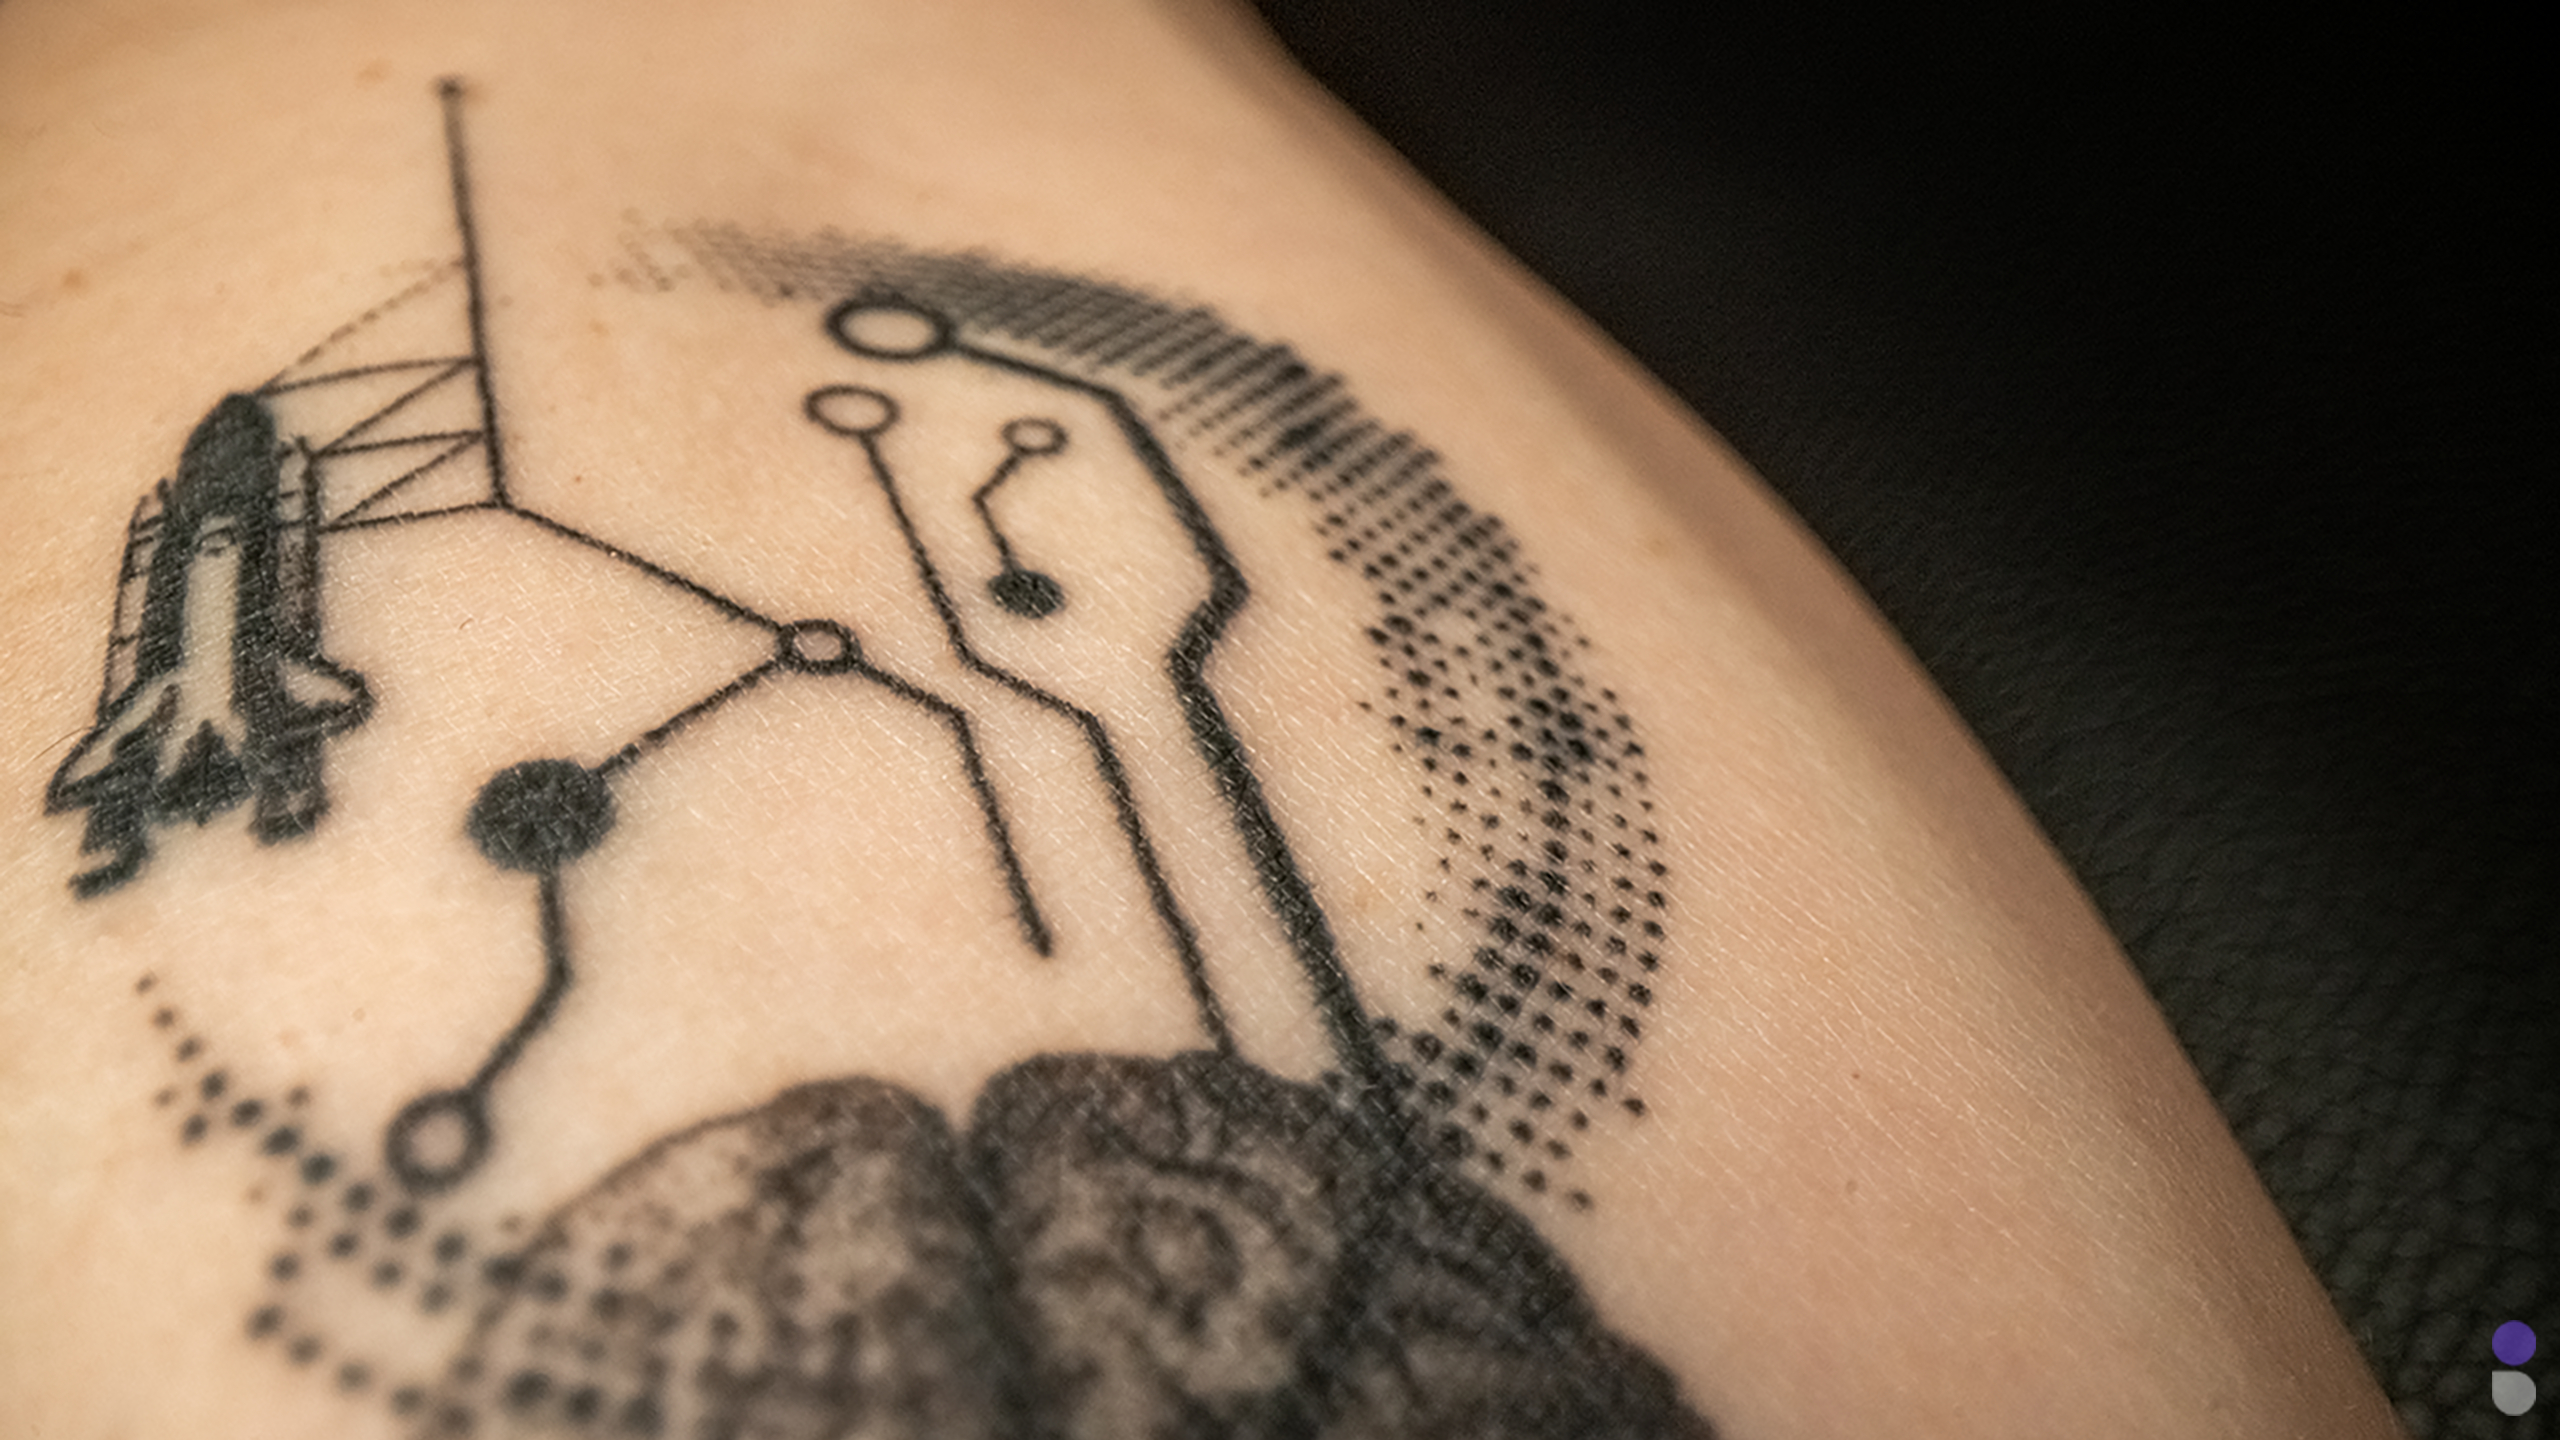 Tattoos as NFTs: Machine Paves Way for Artist Royalties – Here's How it Works